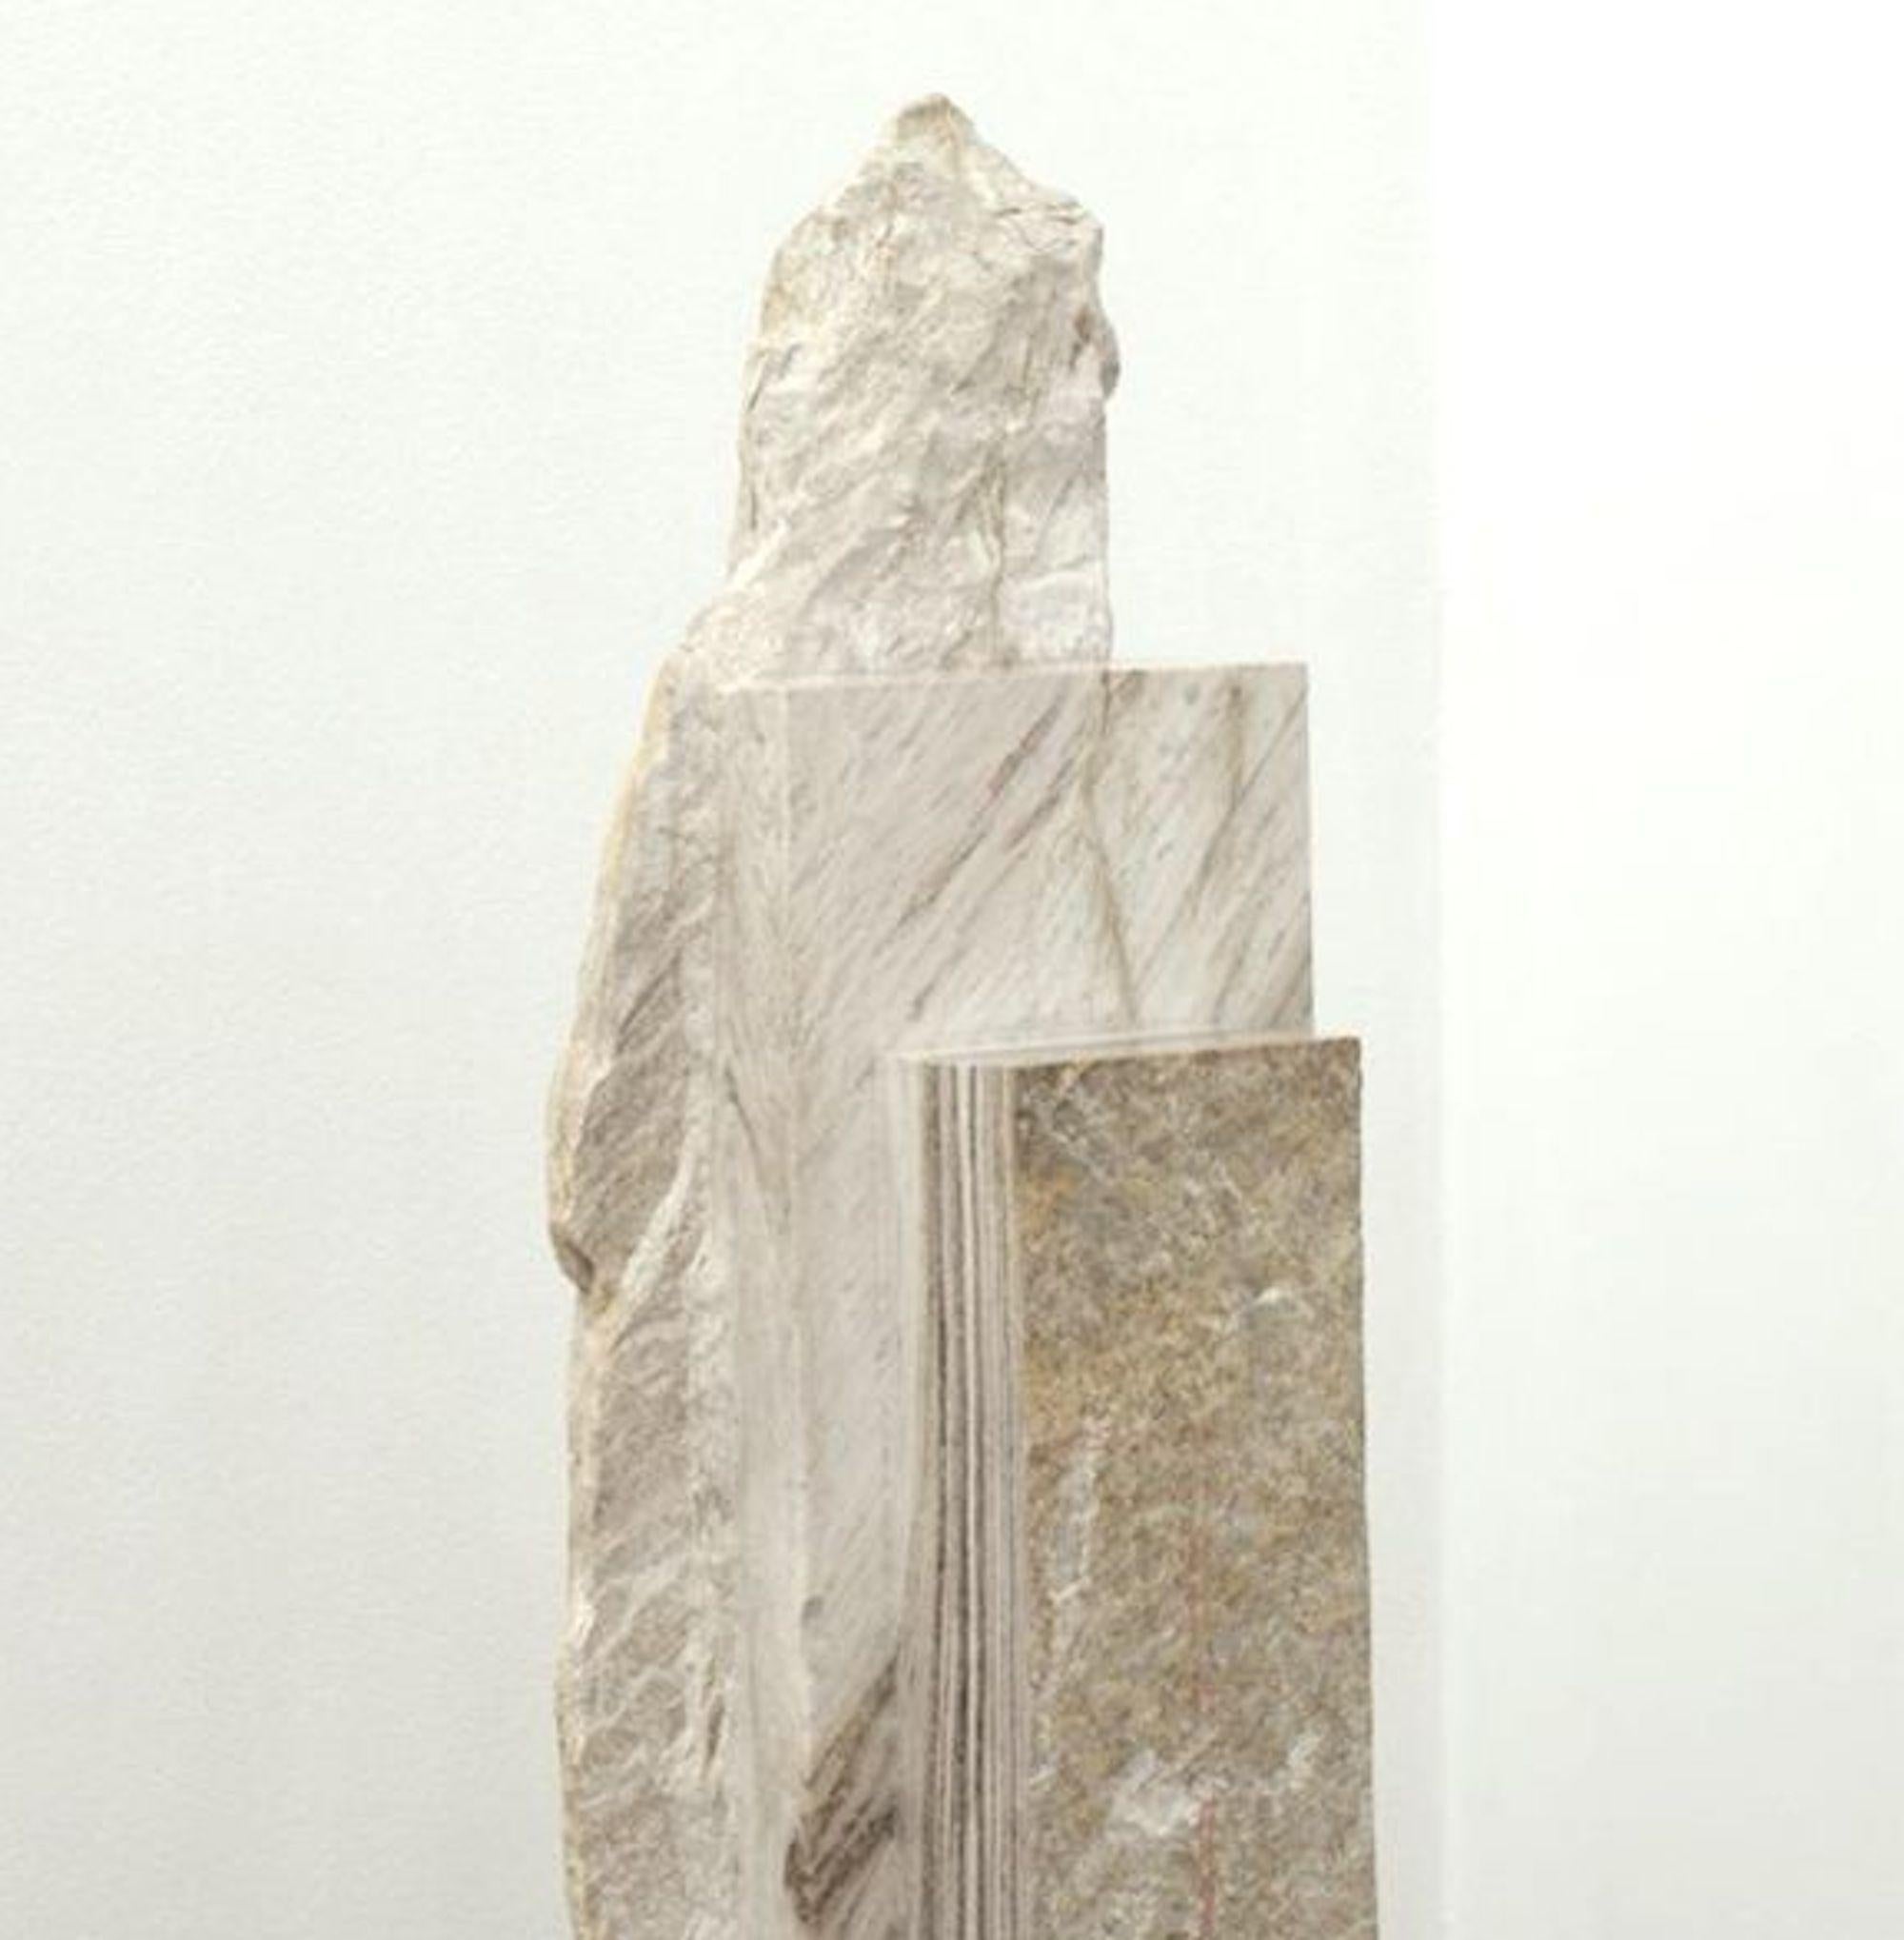 Untitled II, Palissandro by Mattia Bosco - Abstract stone sculpture, marble For Sale 2